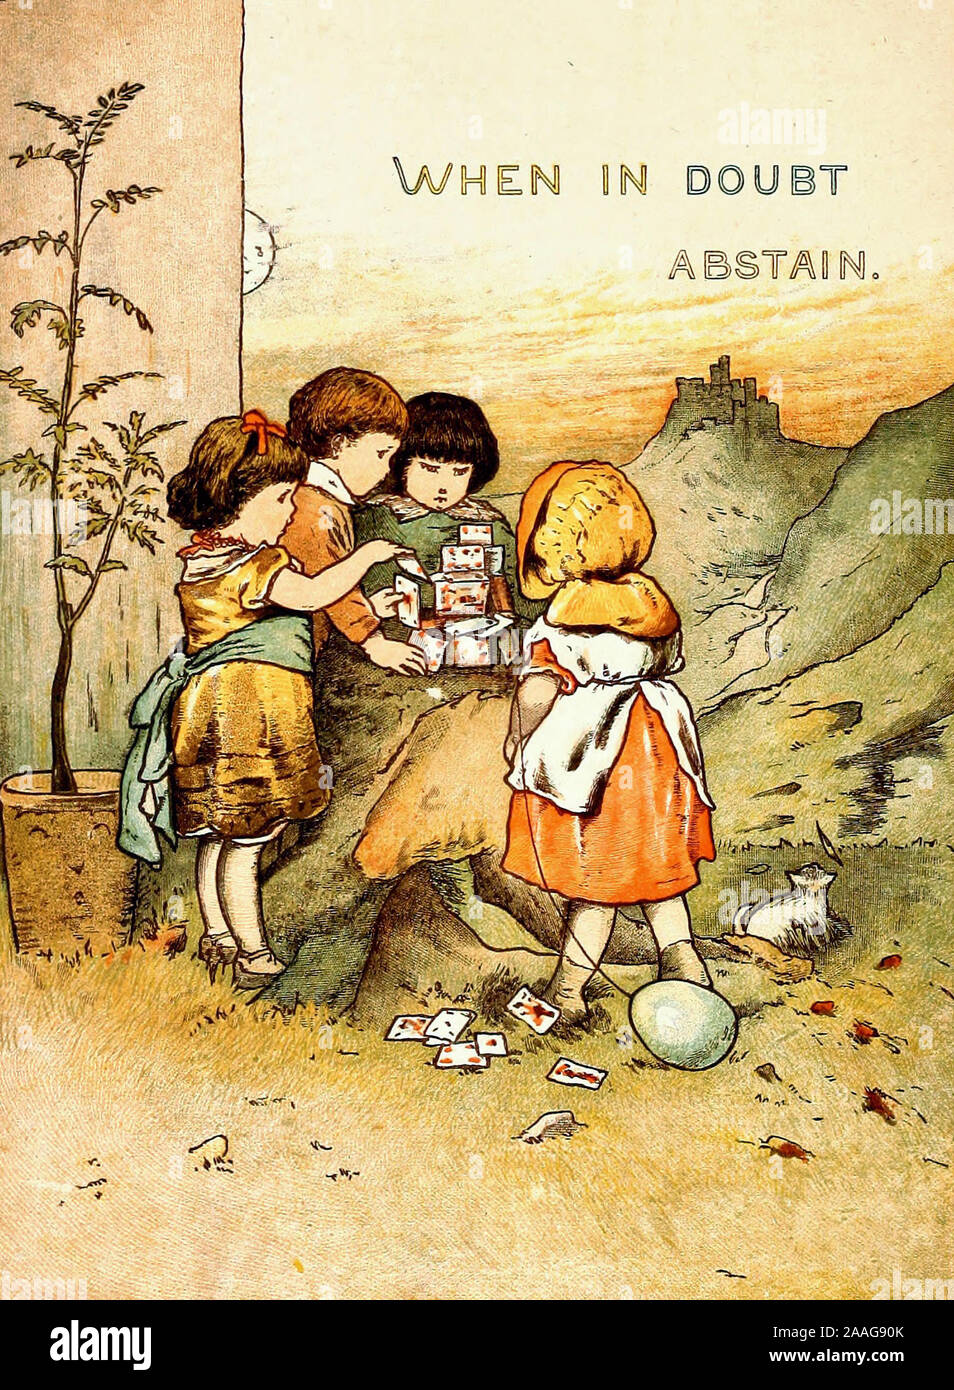 When in doubt abstain - Vintage illustration of an old Proverb Stock Photo